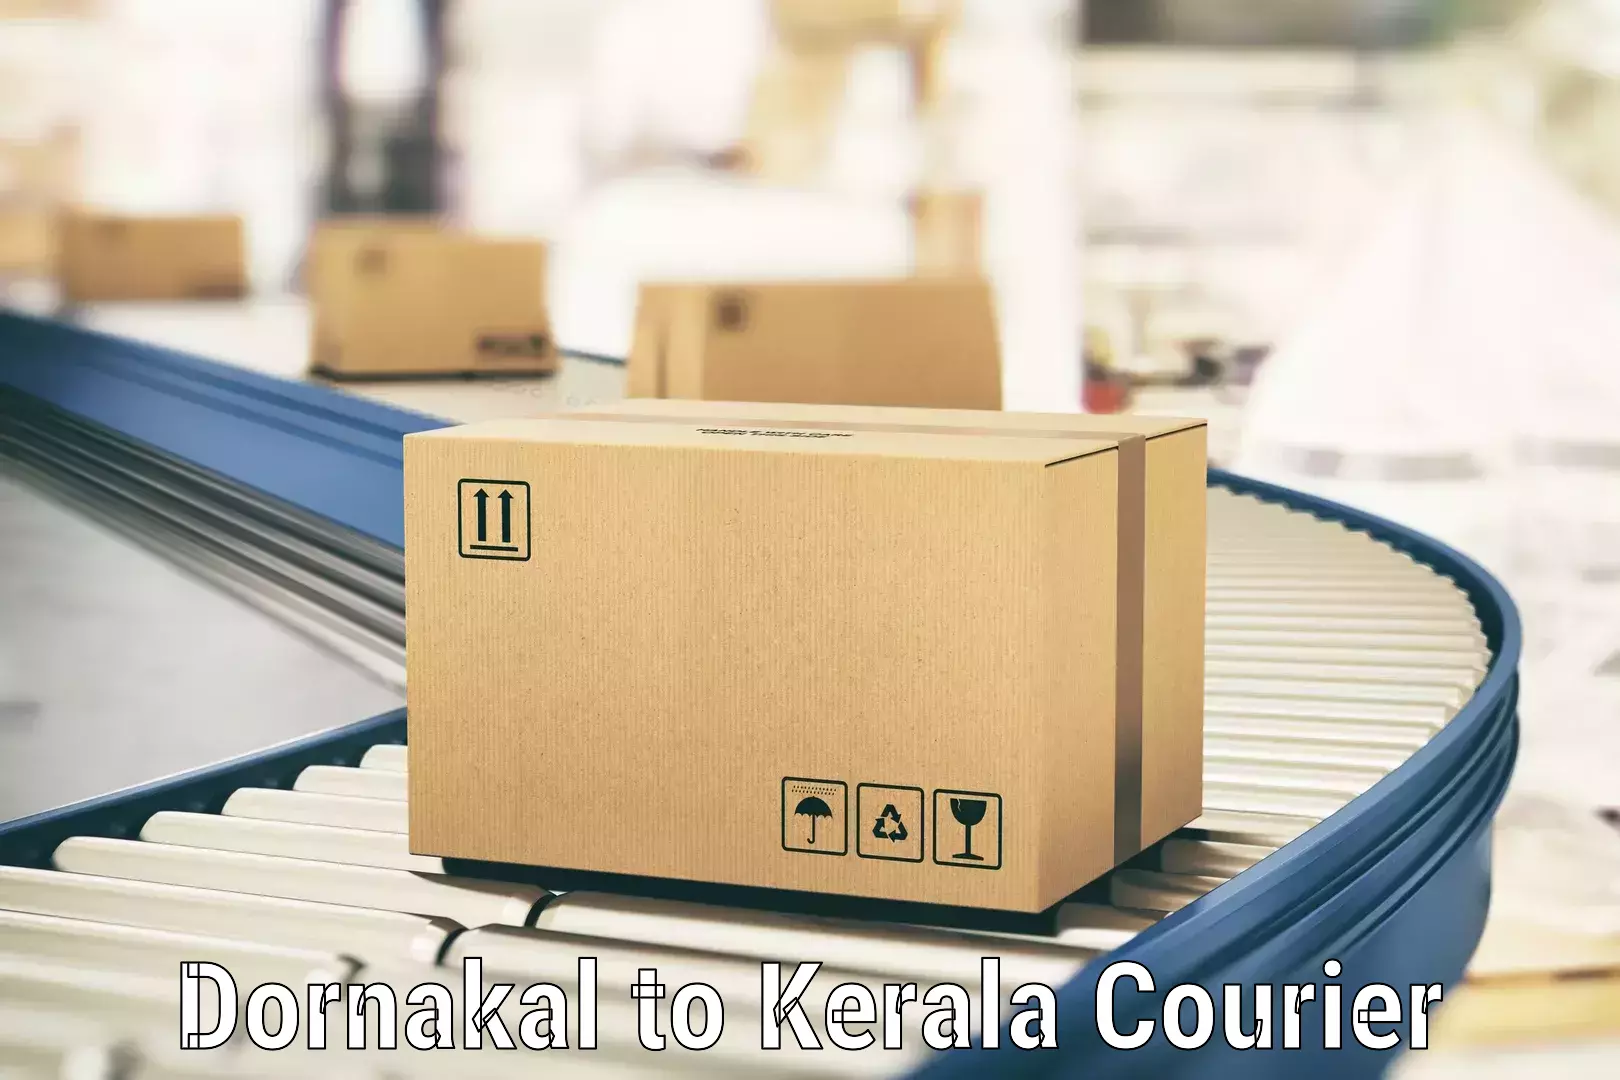 Sustainable delivery practices Dornakal to Kannur